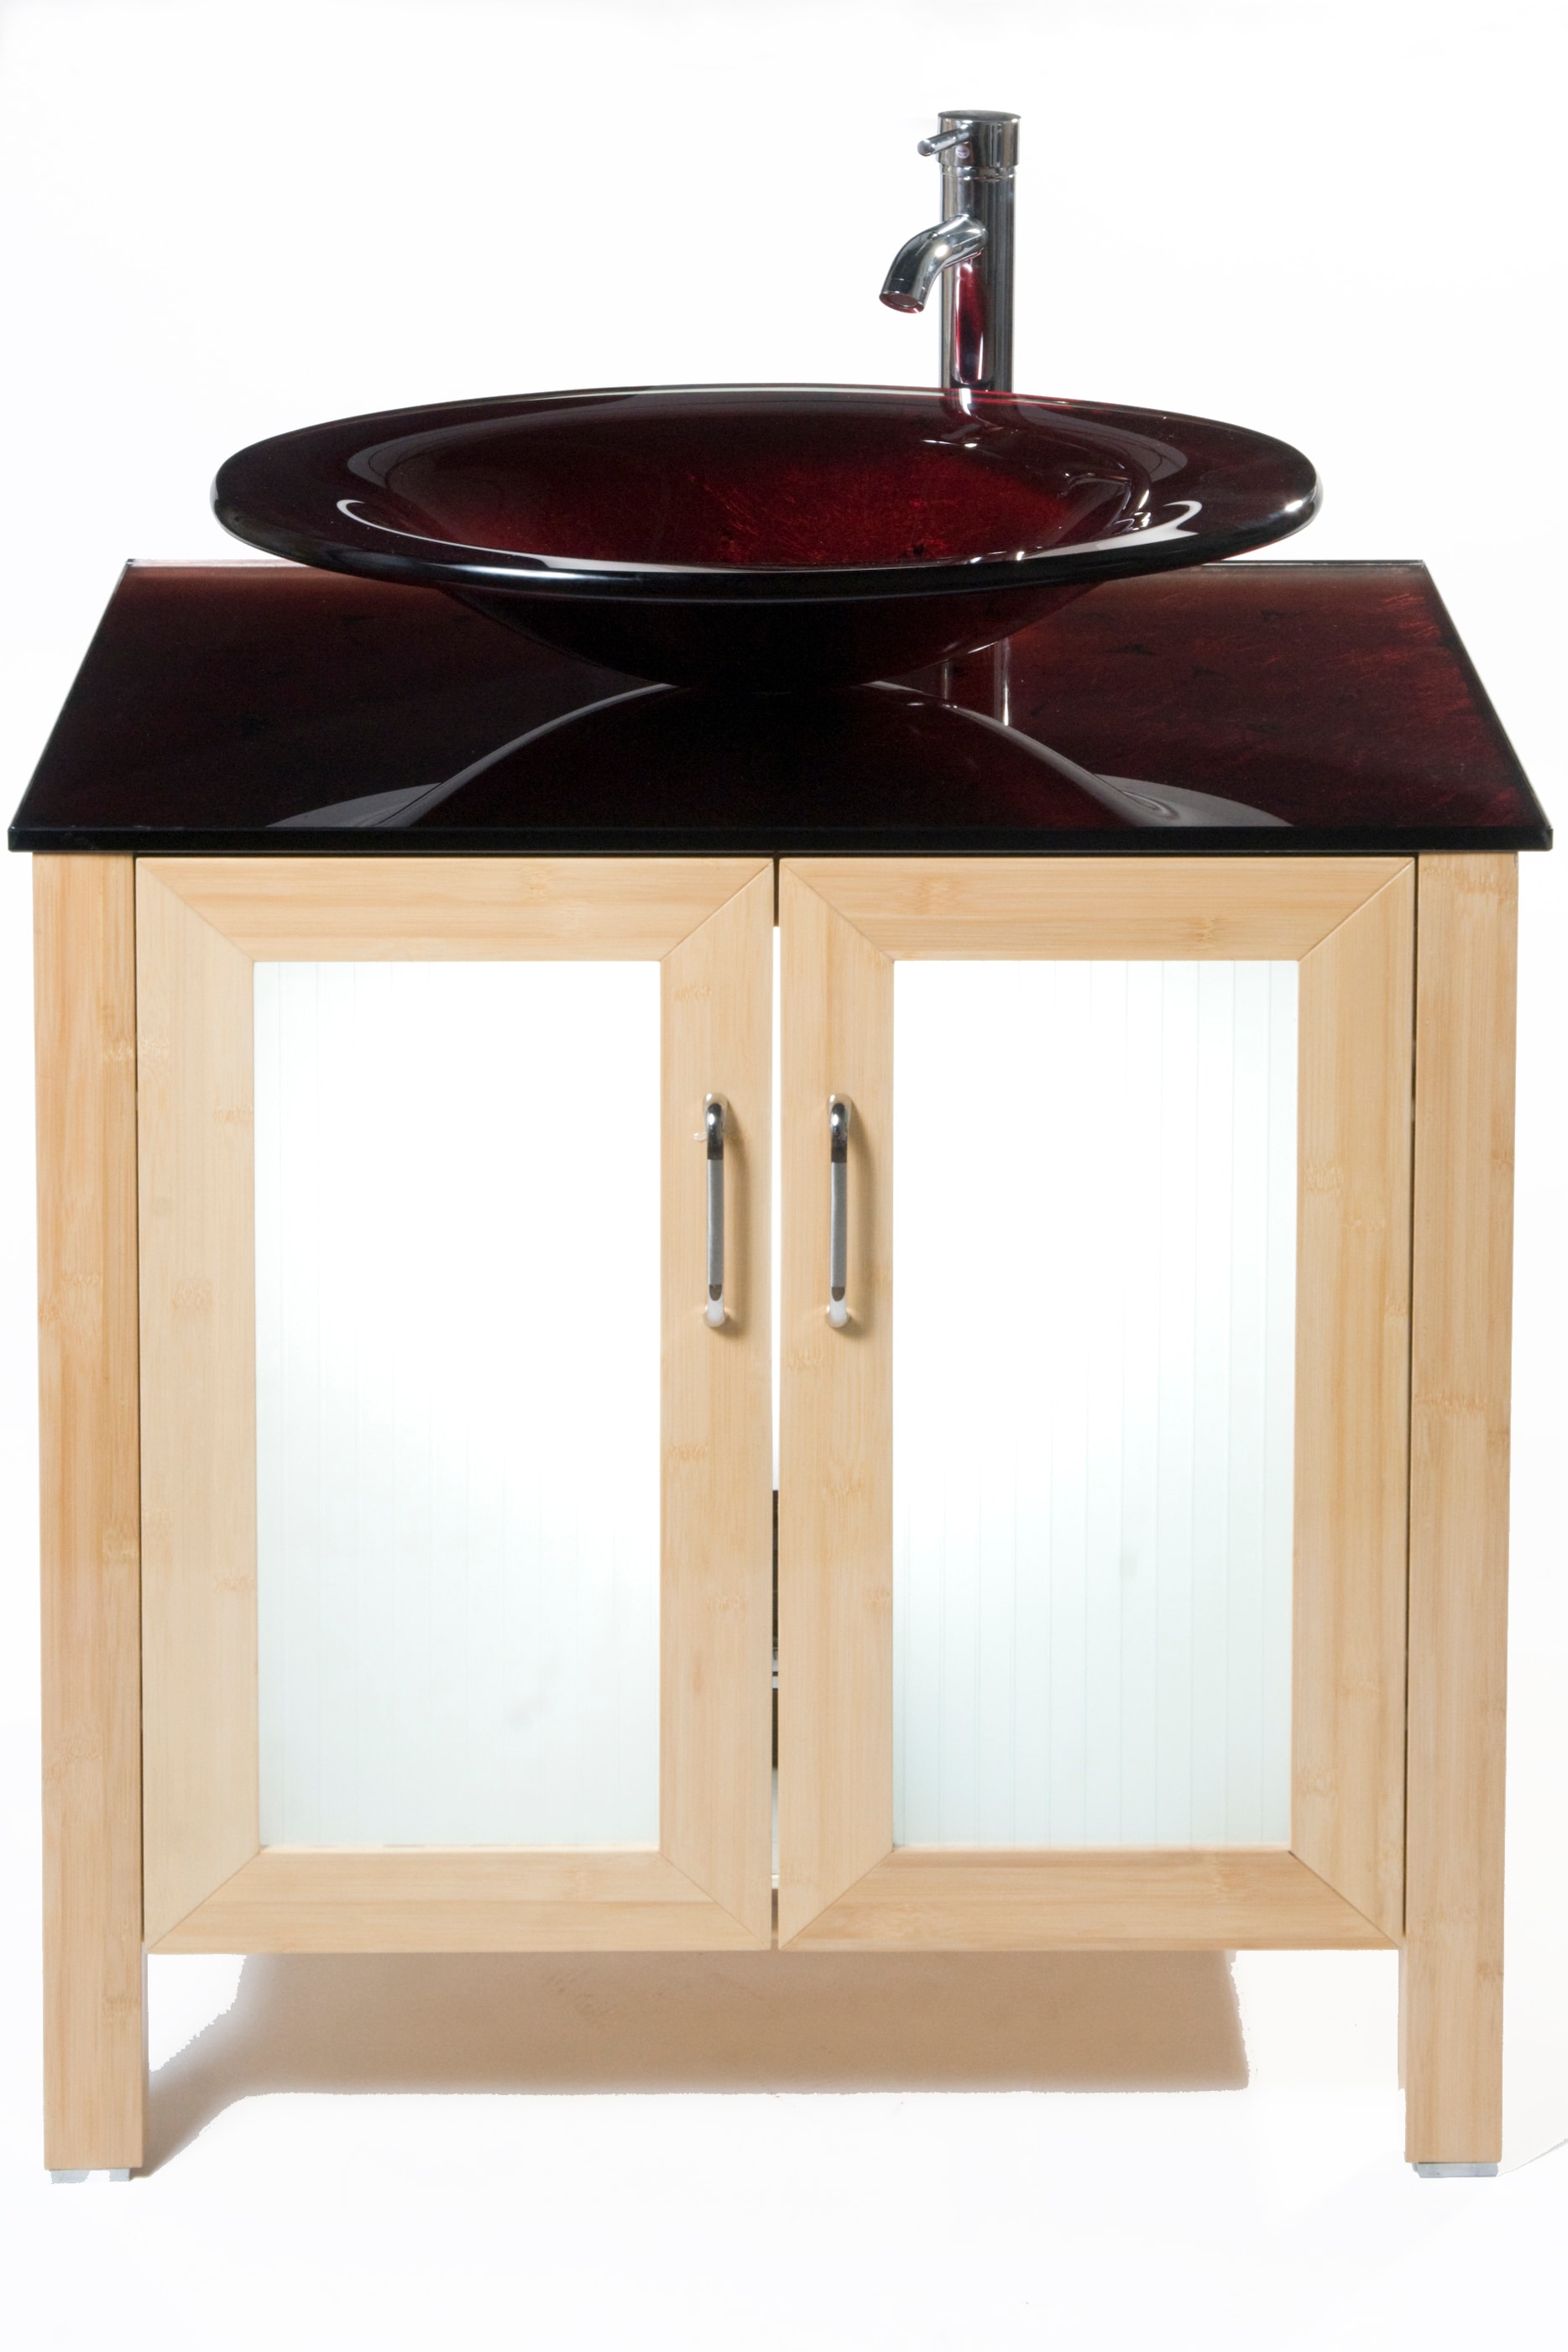 In The Bathroom Vanities With Tops, How Much Does A Vanity Top Cost